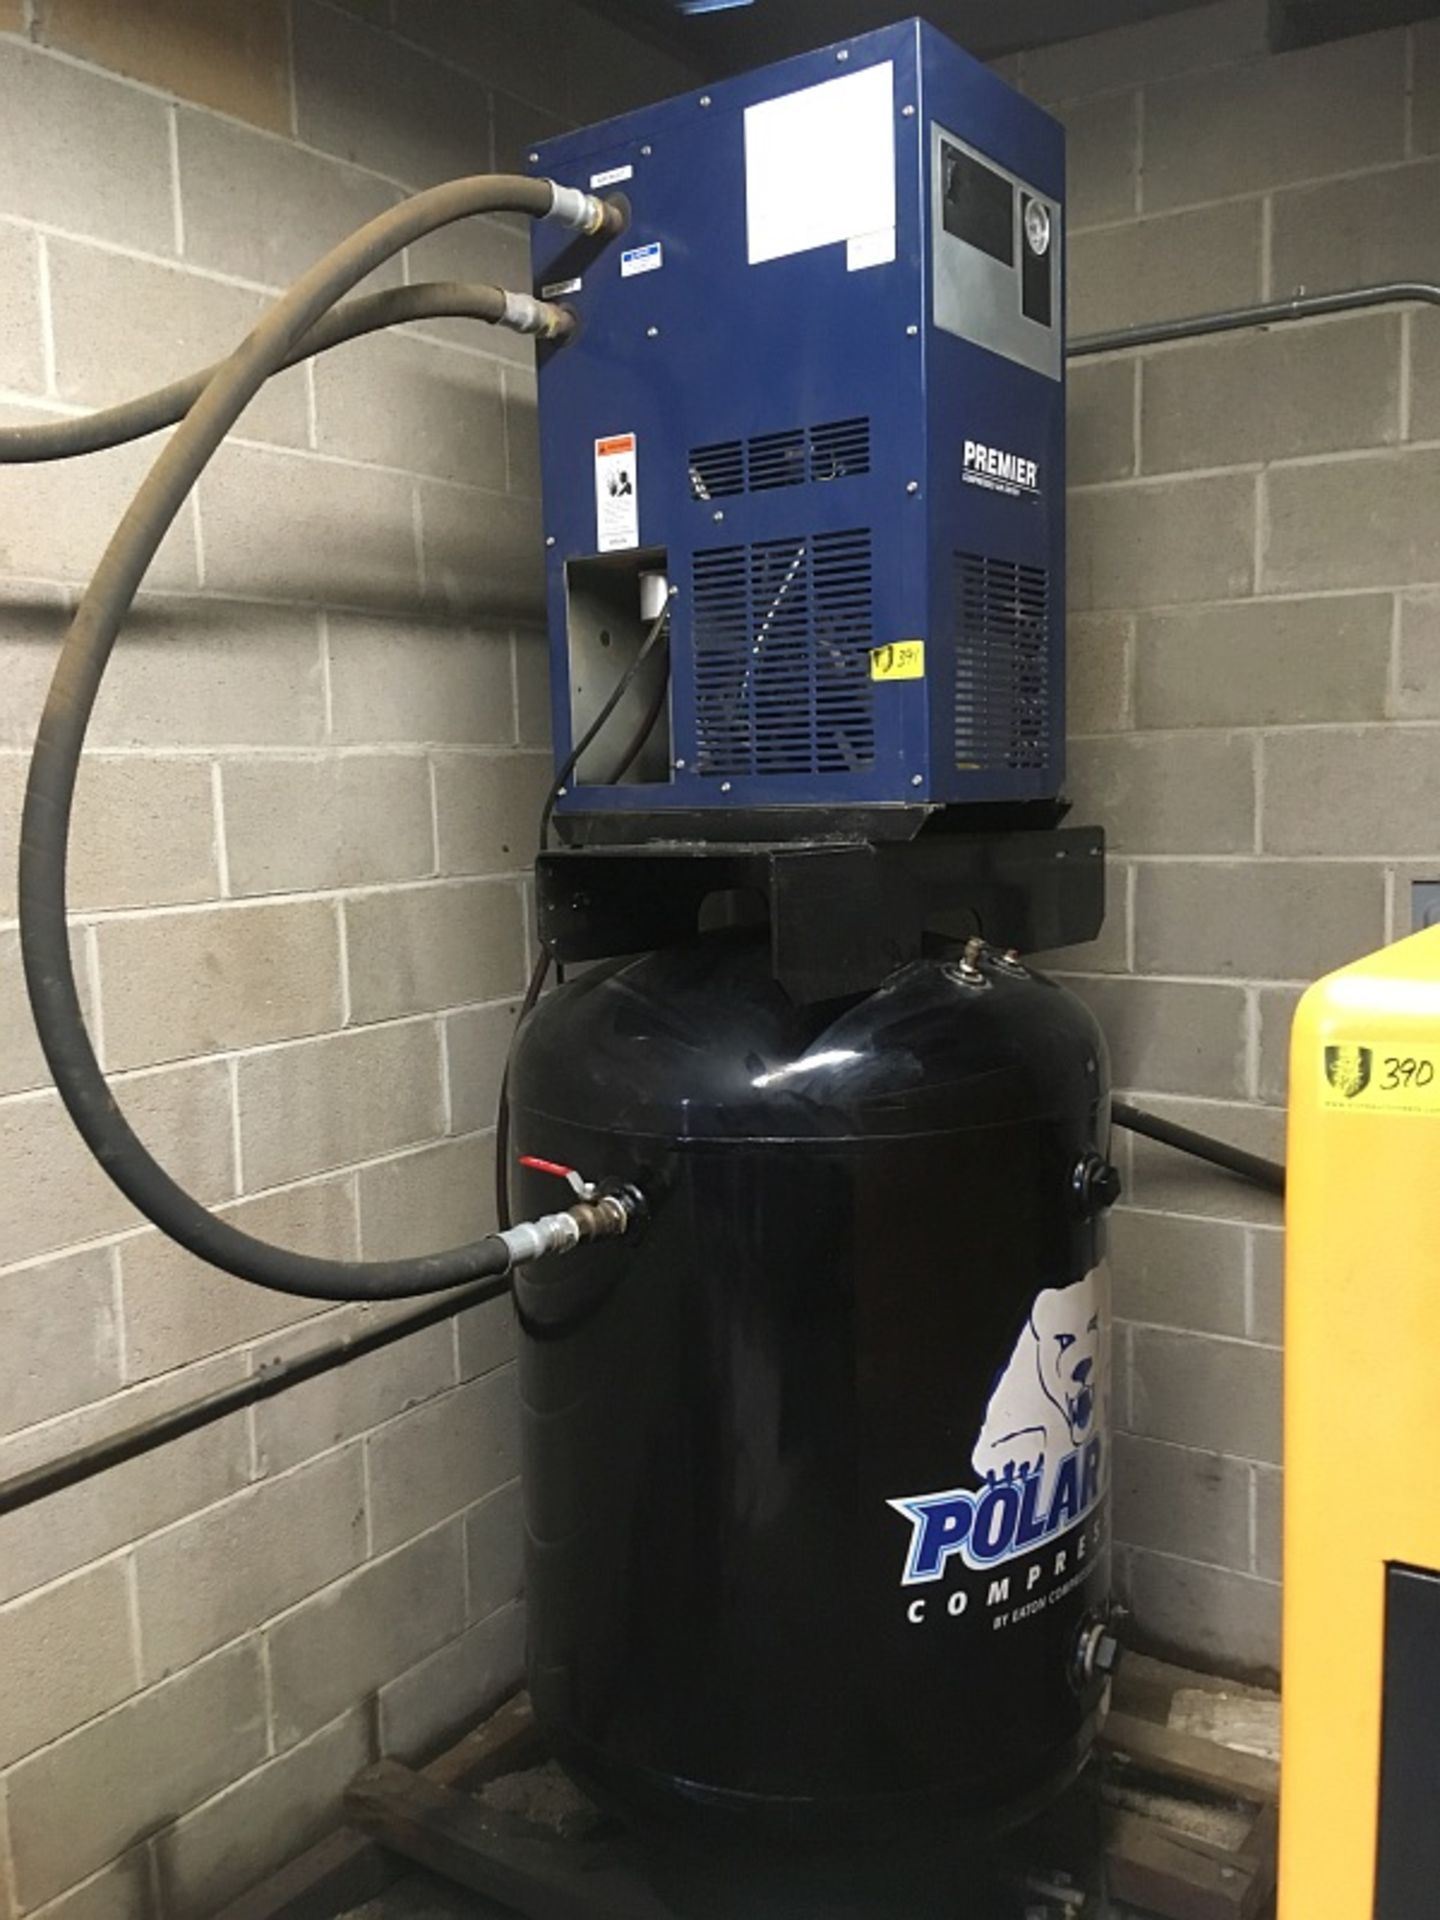 Refrigerated Air Dryer, ¾ HP, Mdl PRA-1008B1, SN 519723 and approx. 150 gallon tank